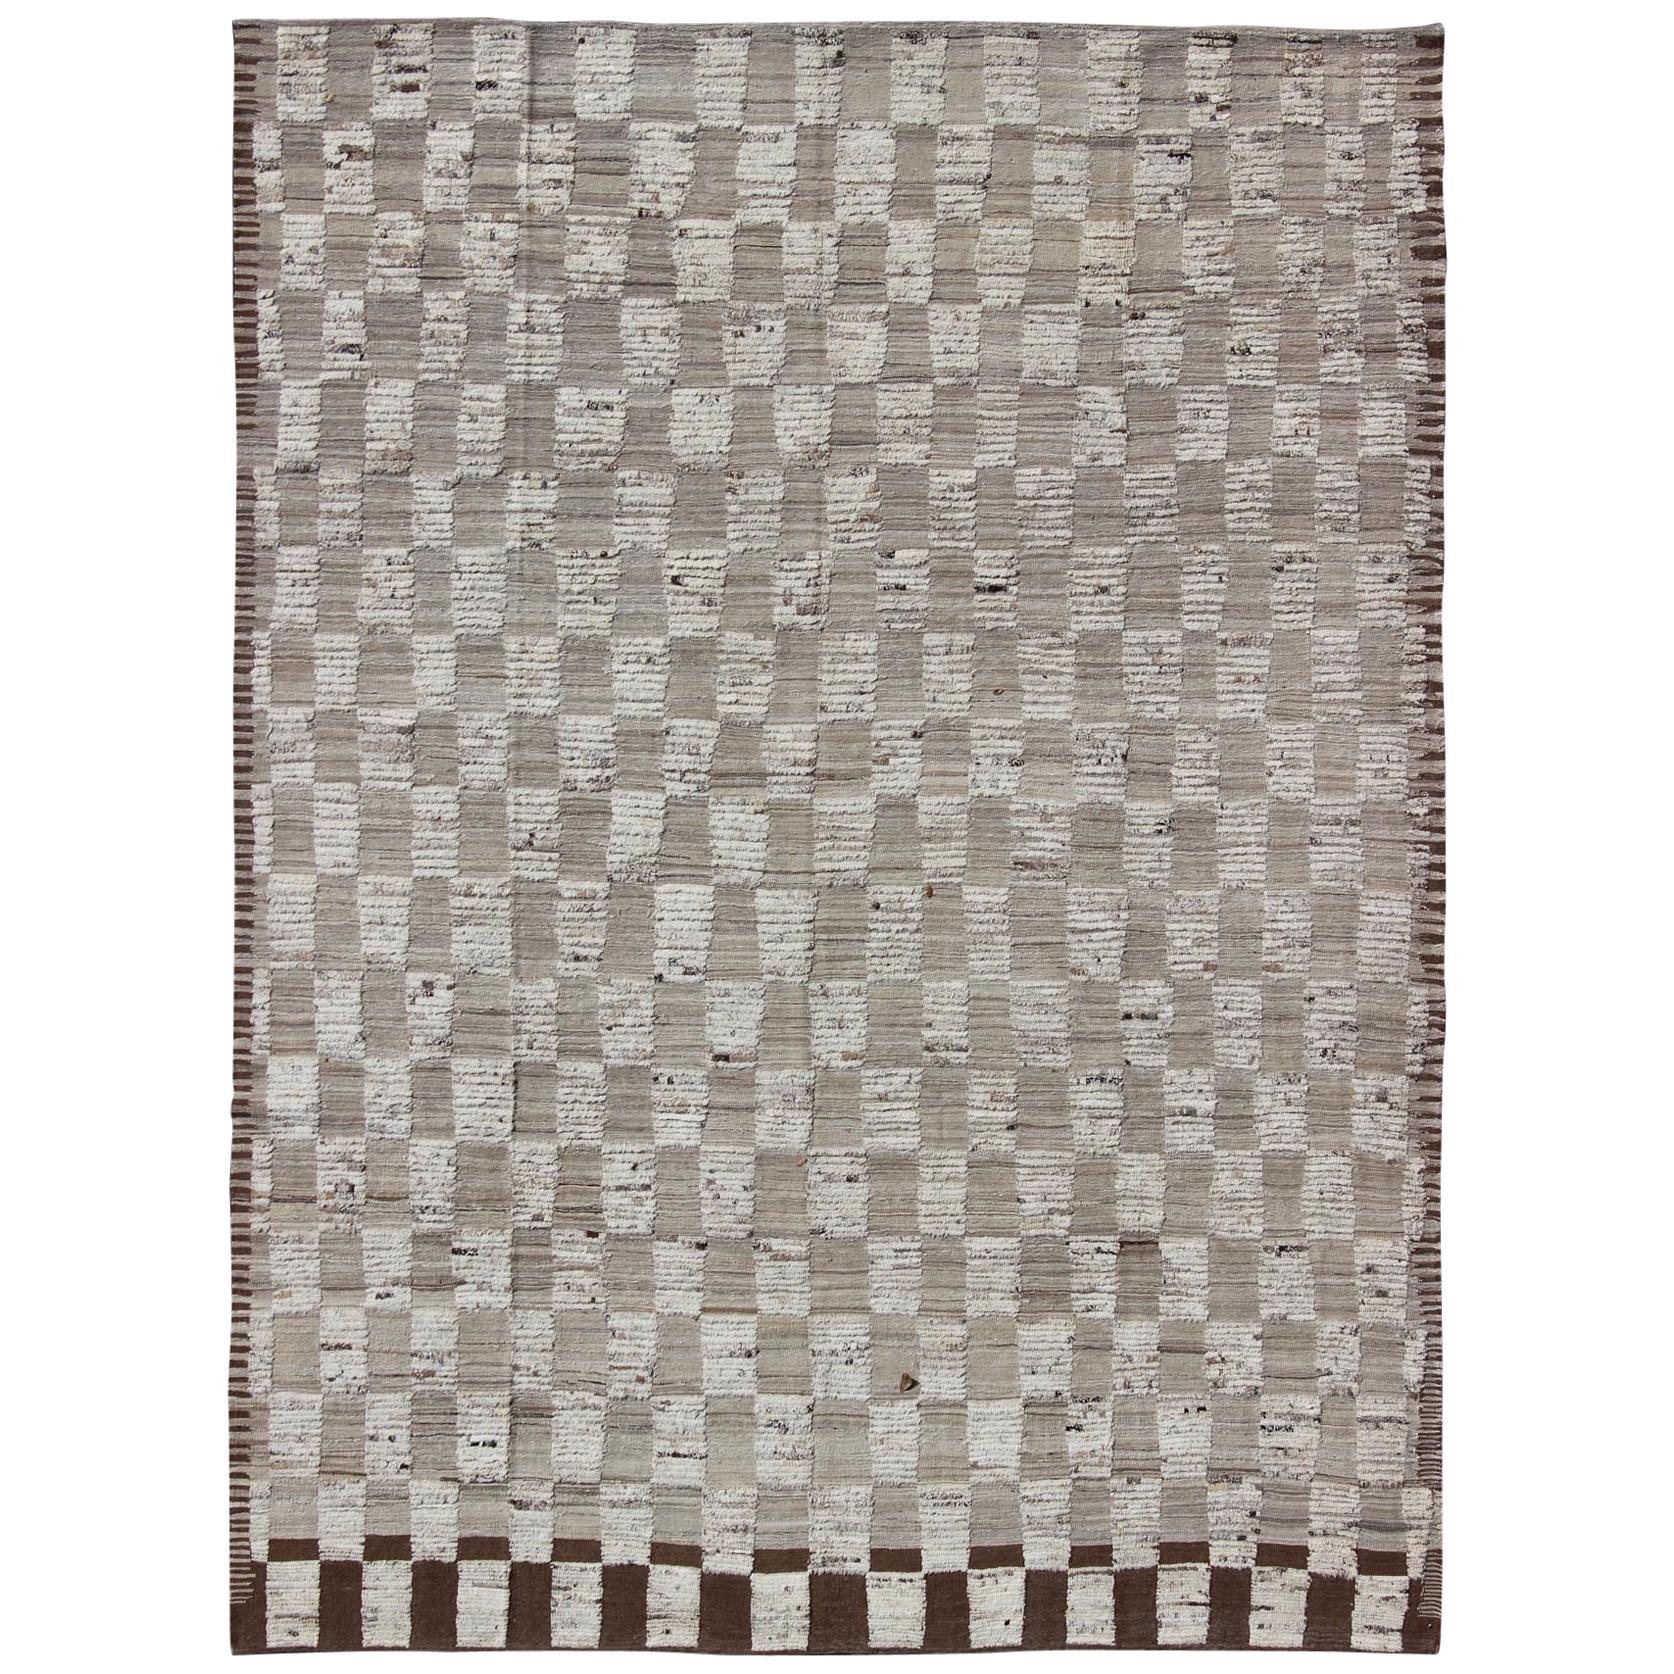 Hi-Low Piled Rug With Checkerboard Design in Earth Tones by Keivan Woven Arts